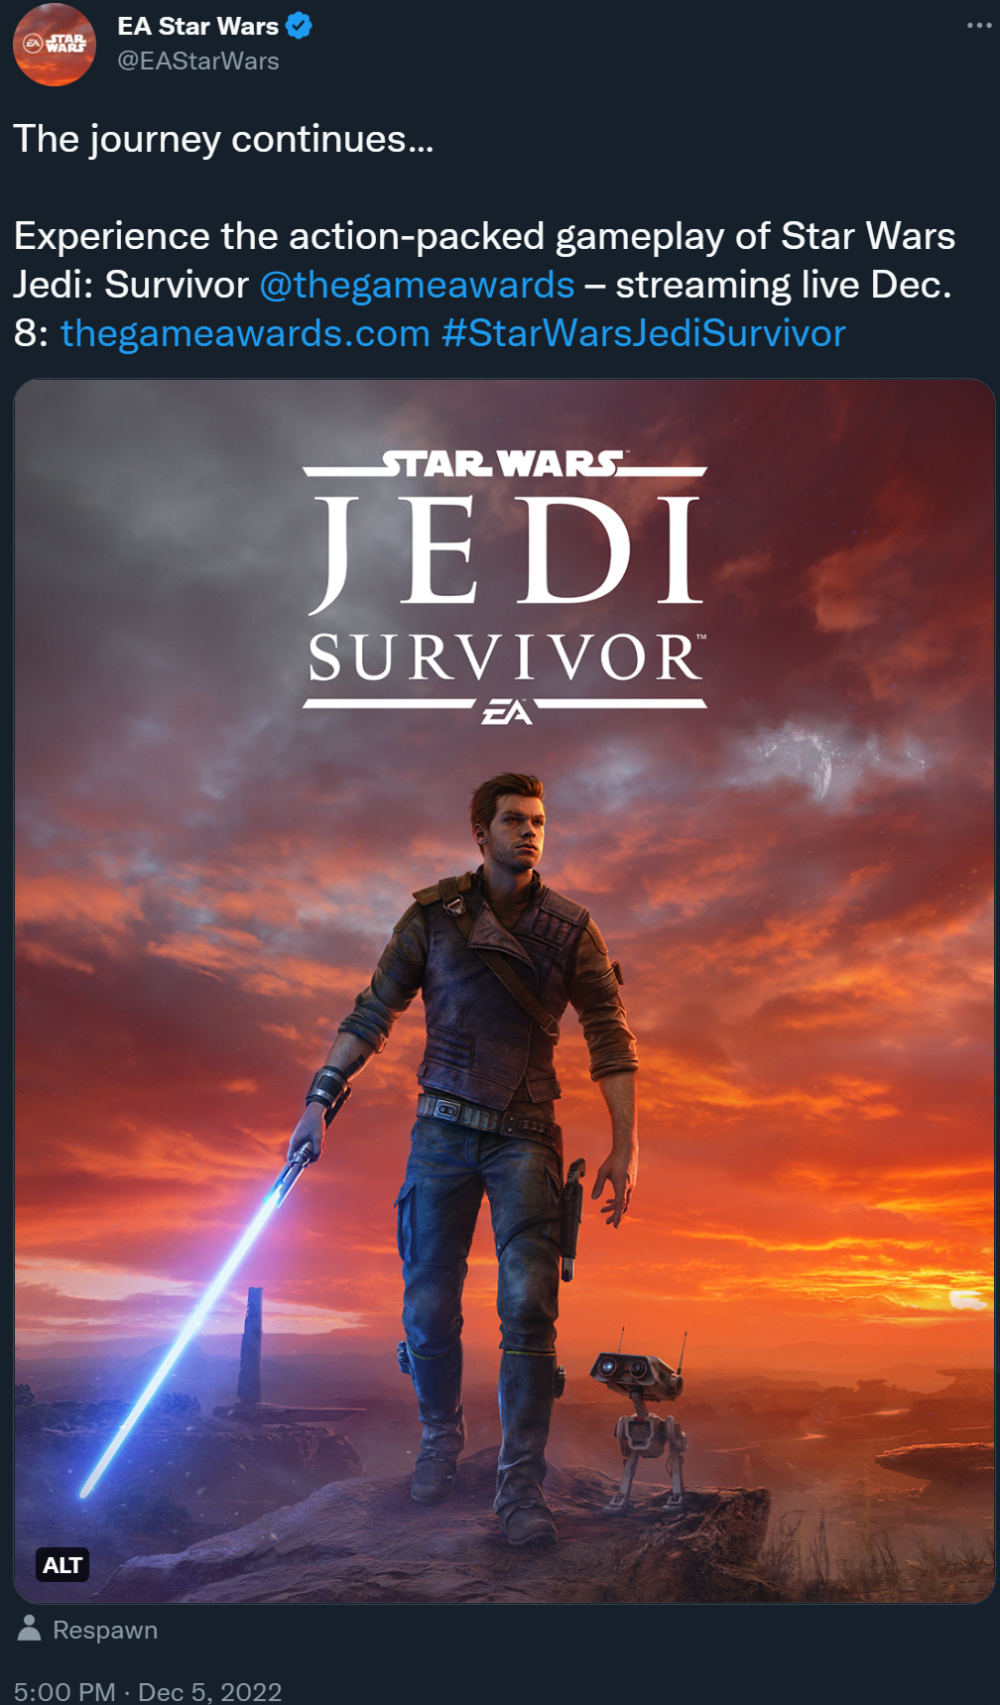 EA reveals the first gameplay trailer for Star Wars Jedi: Survivor will debut at The Game Awards, December 8th via Twitter